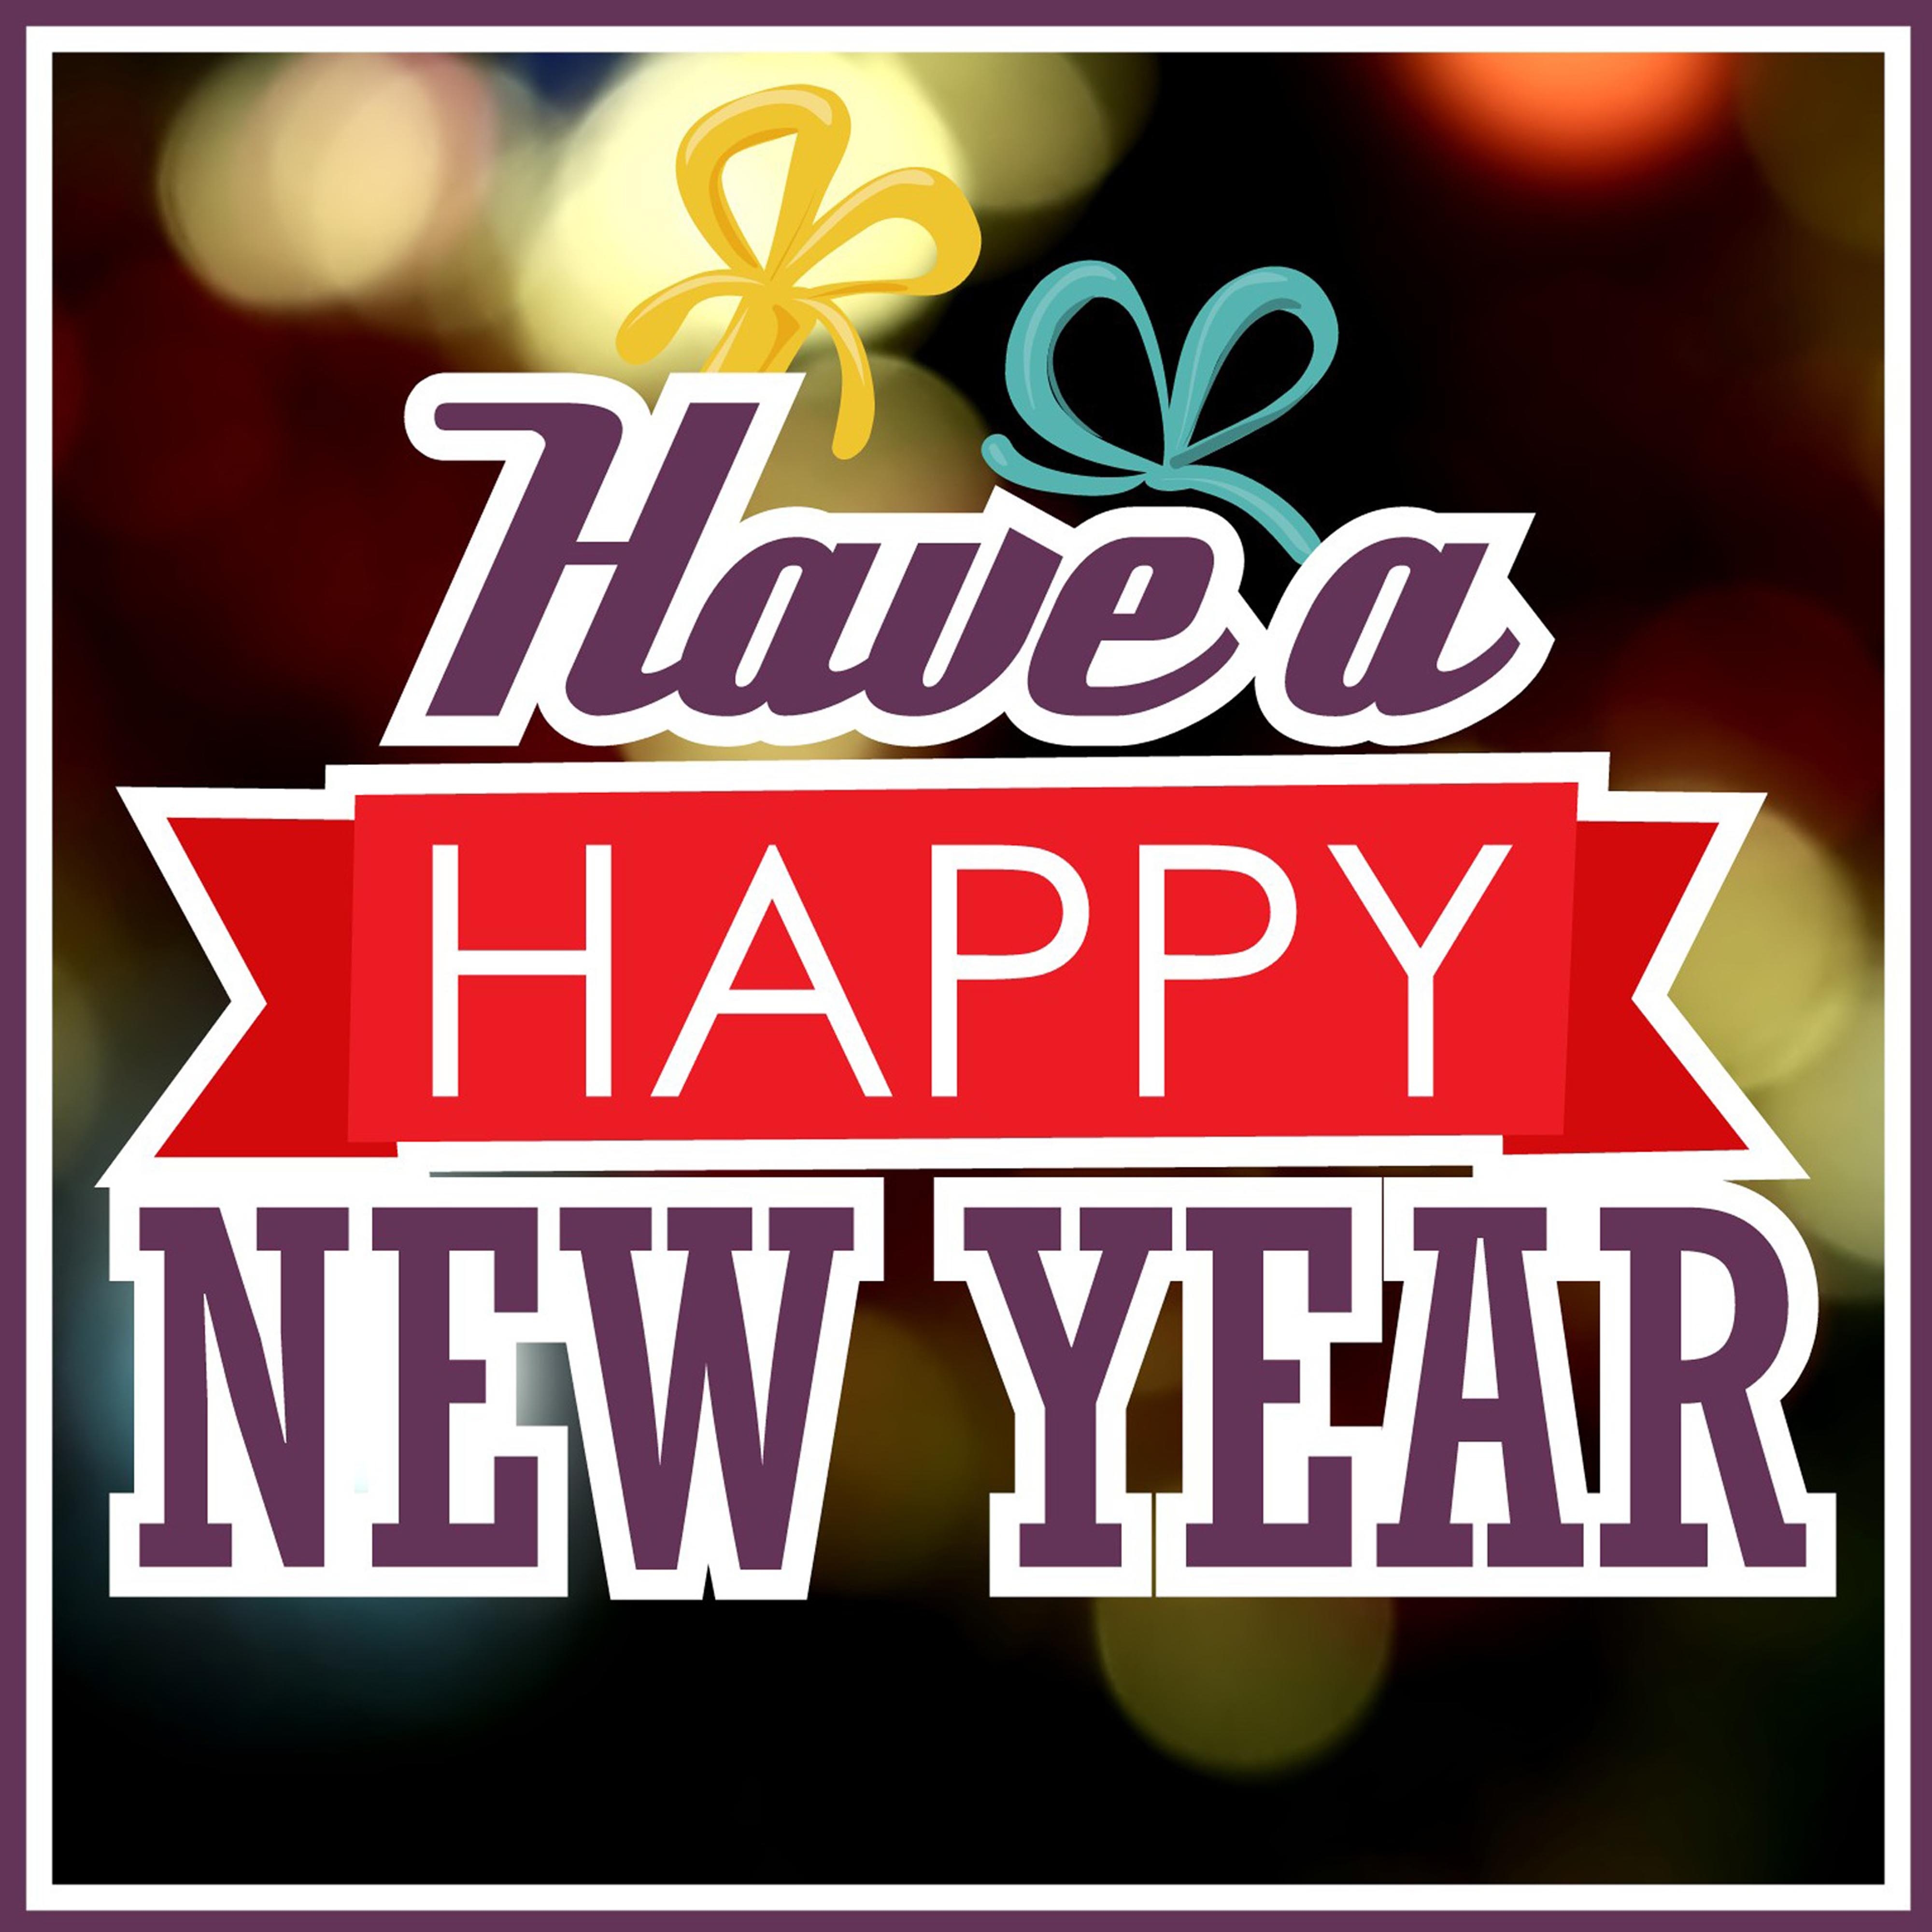 Have a Happy New Year: Chillout and Lounge Music for New Year's Eve Celebrations